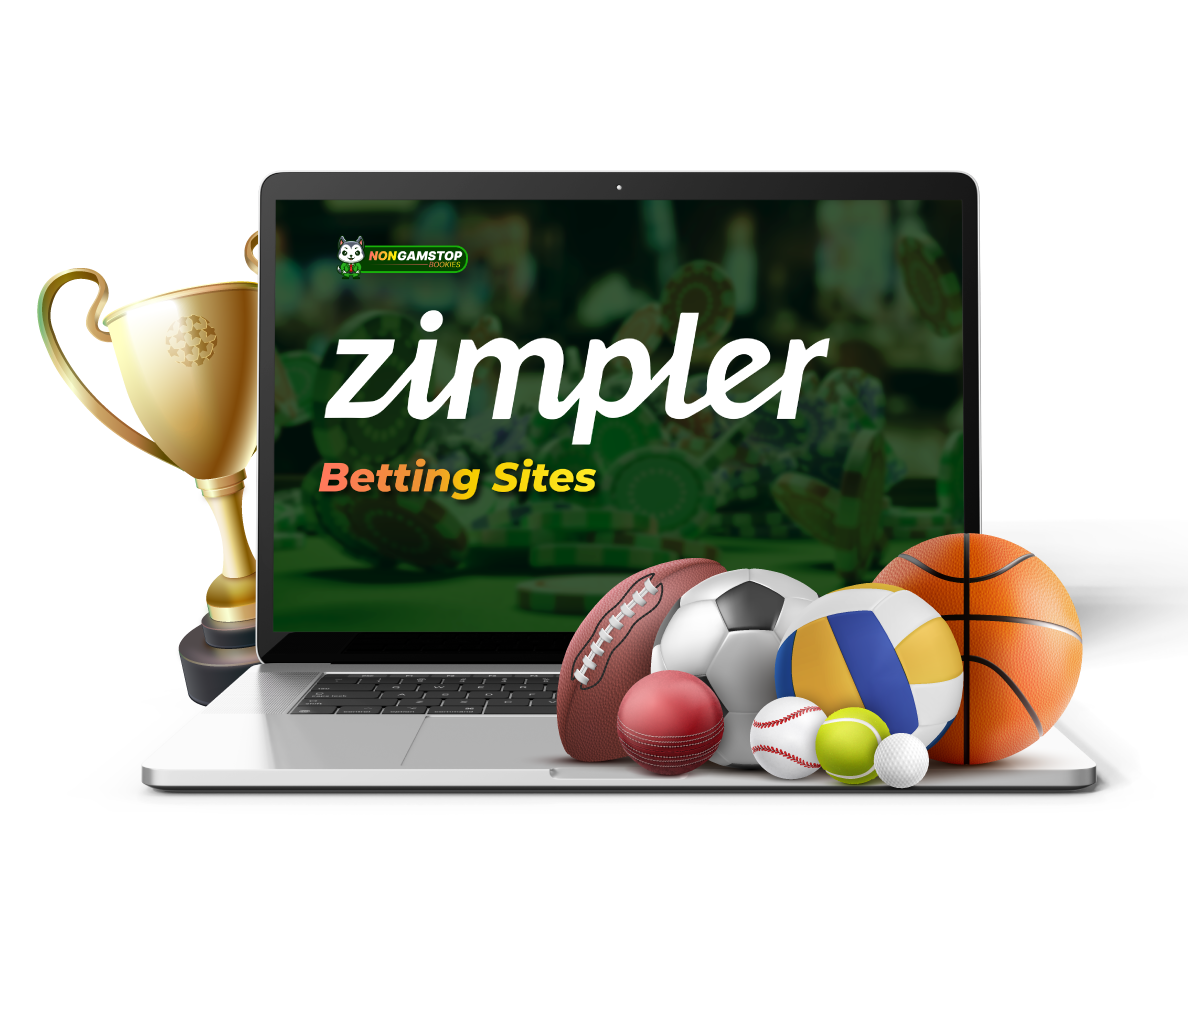 Zimpler Betting Sites